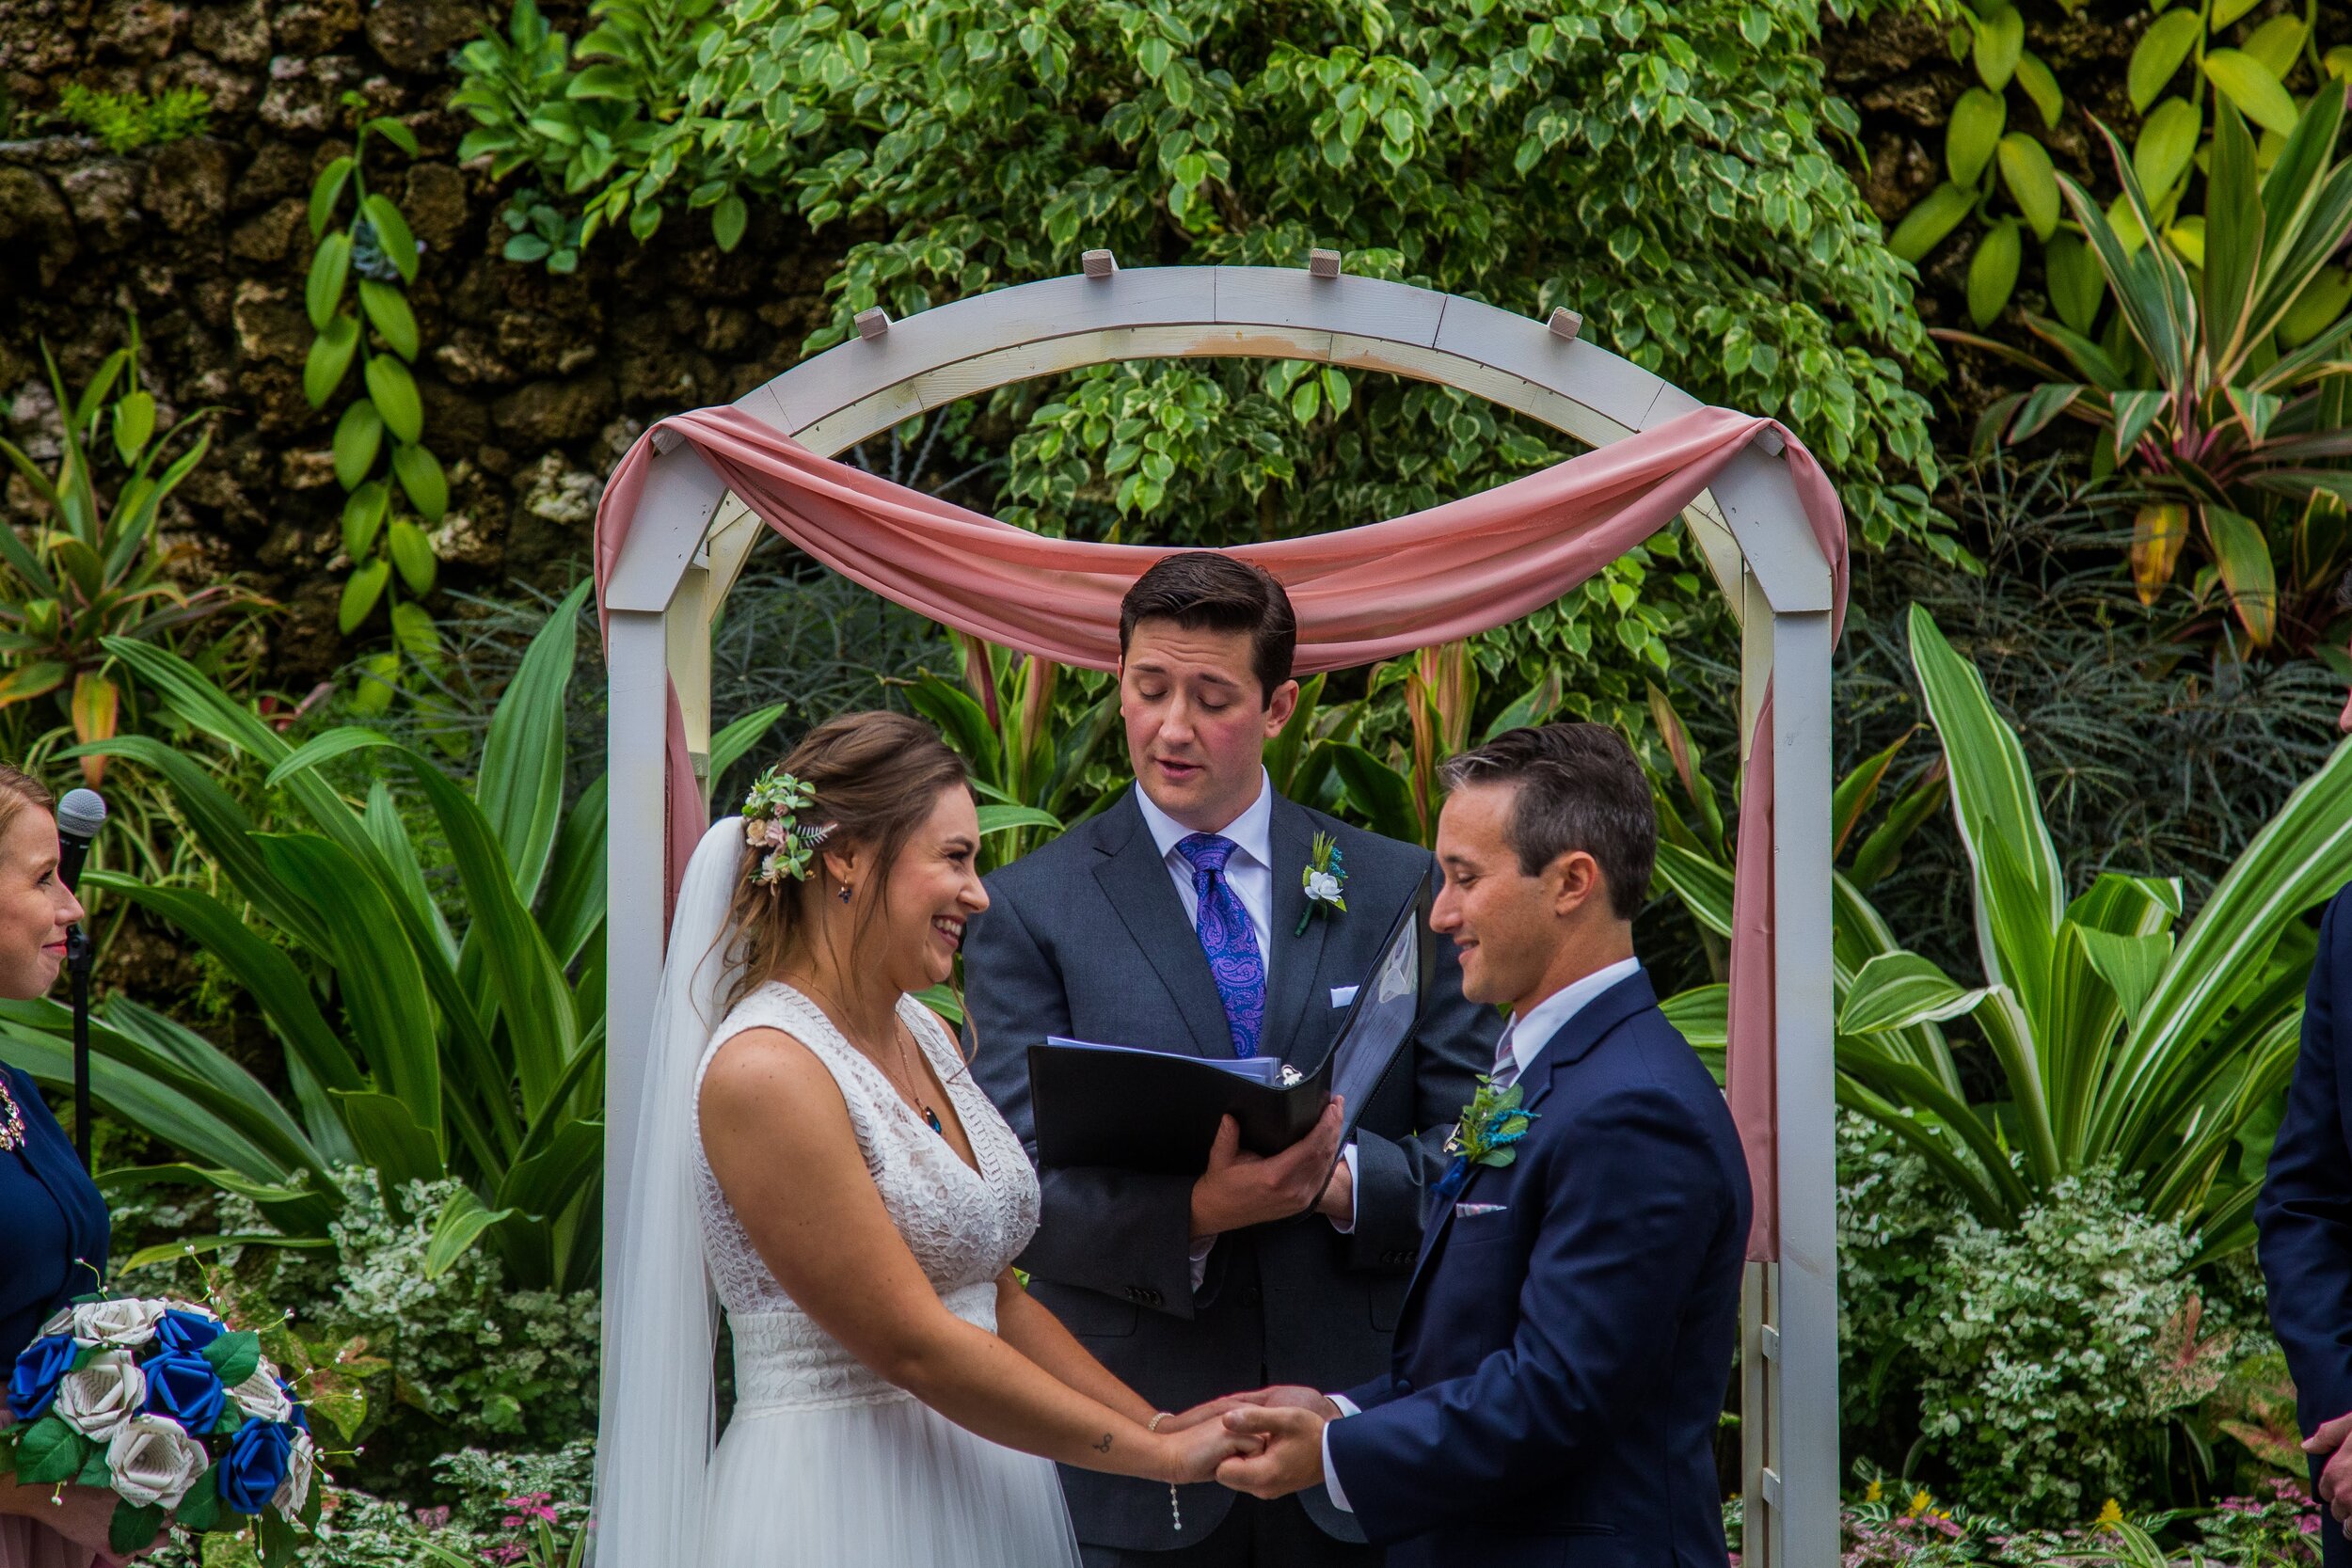 This intimate ceremony was filled with so much love and laughter.